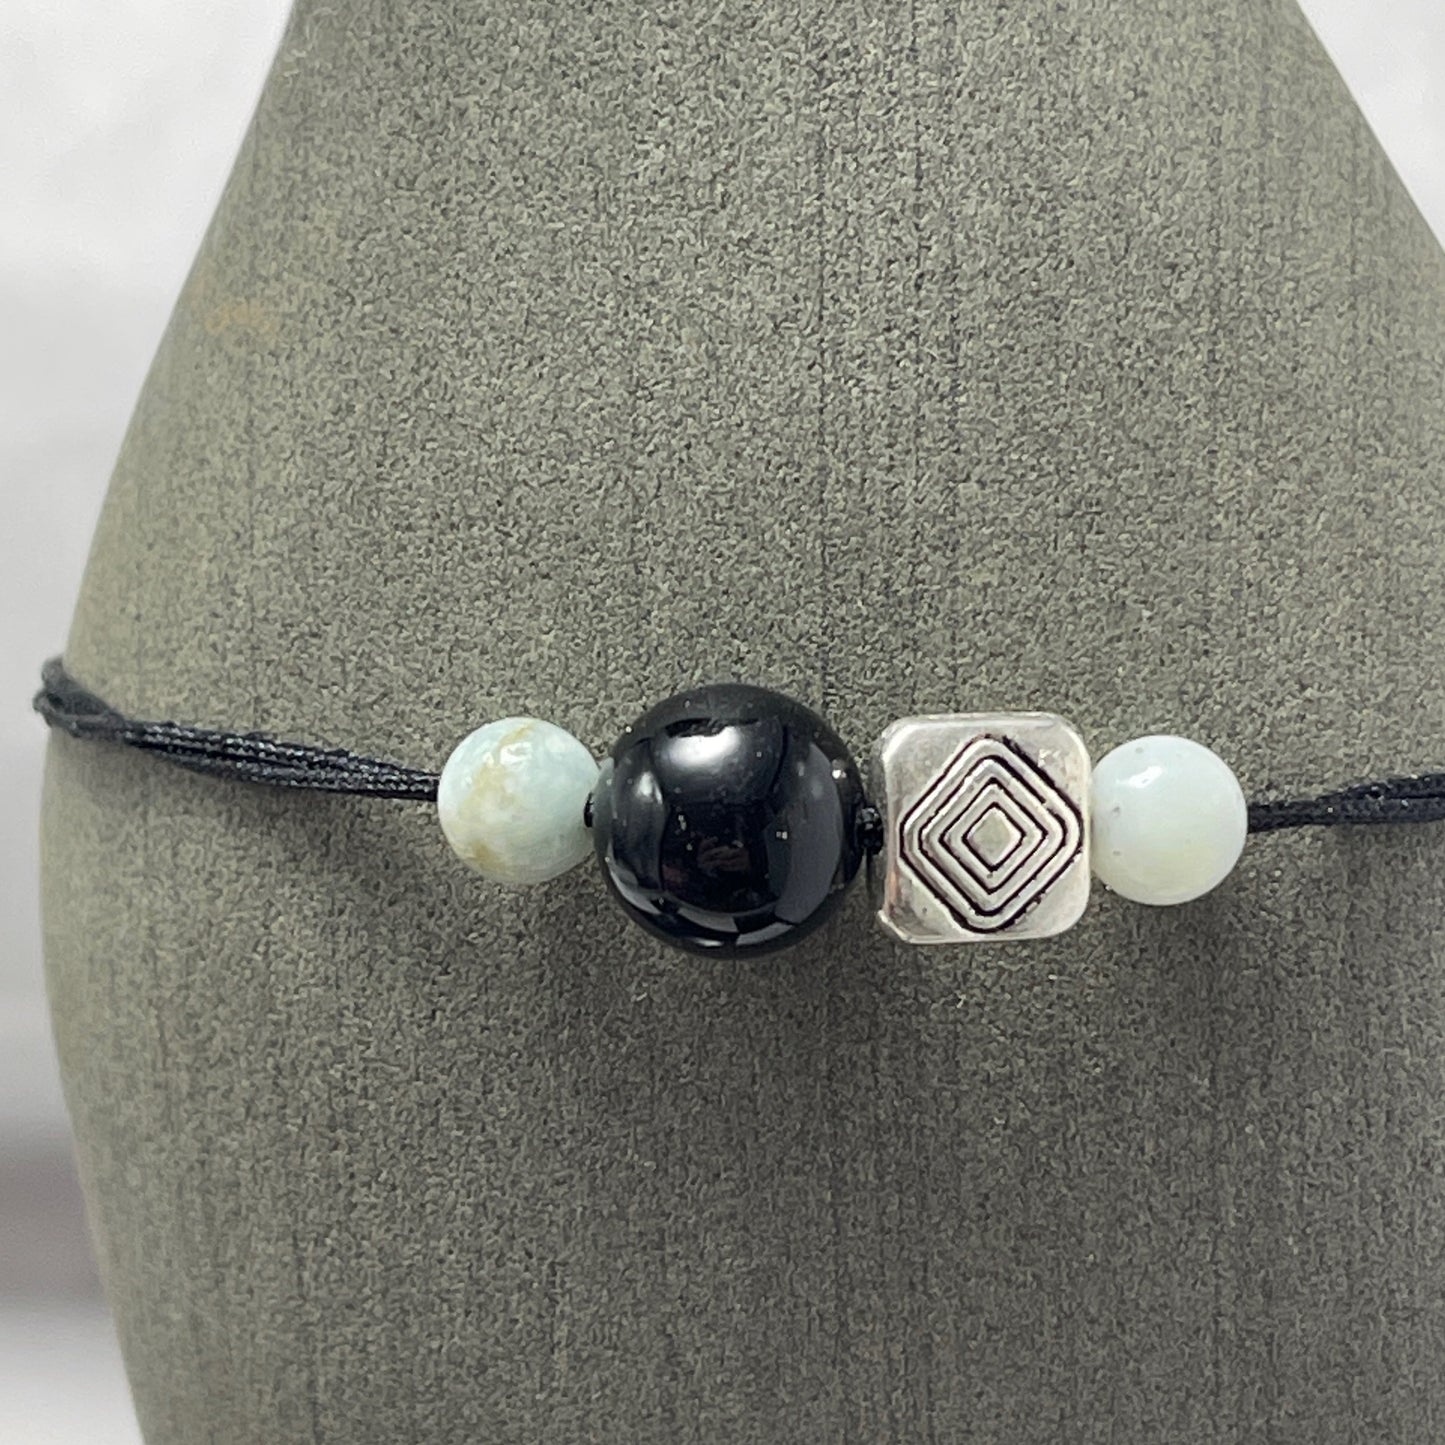 Amazonite and onyx Bracelet for protection and calm